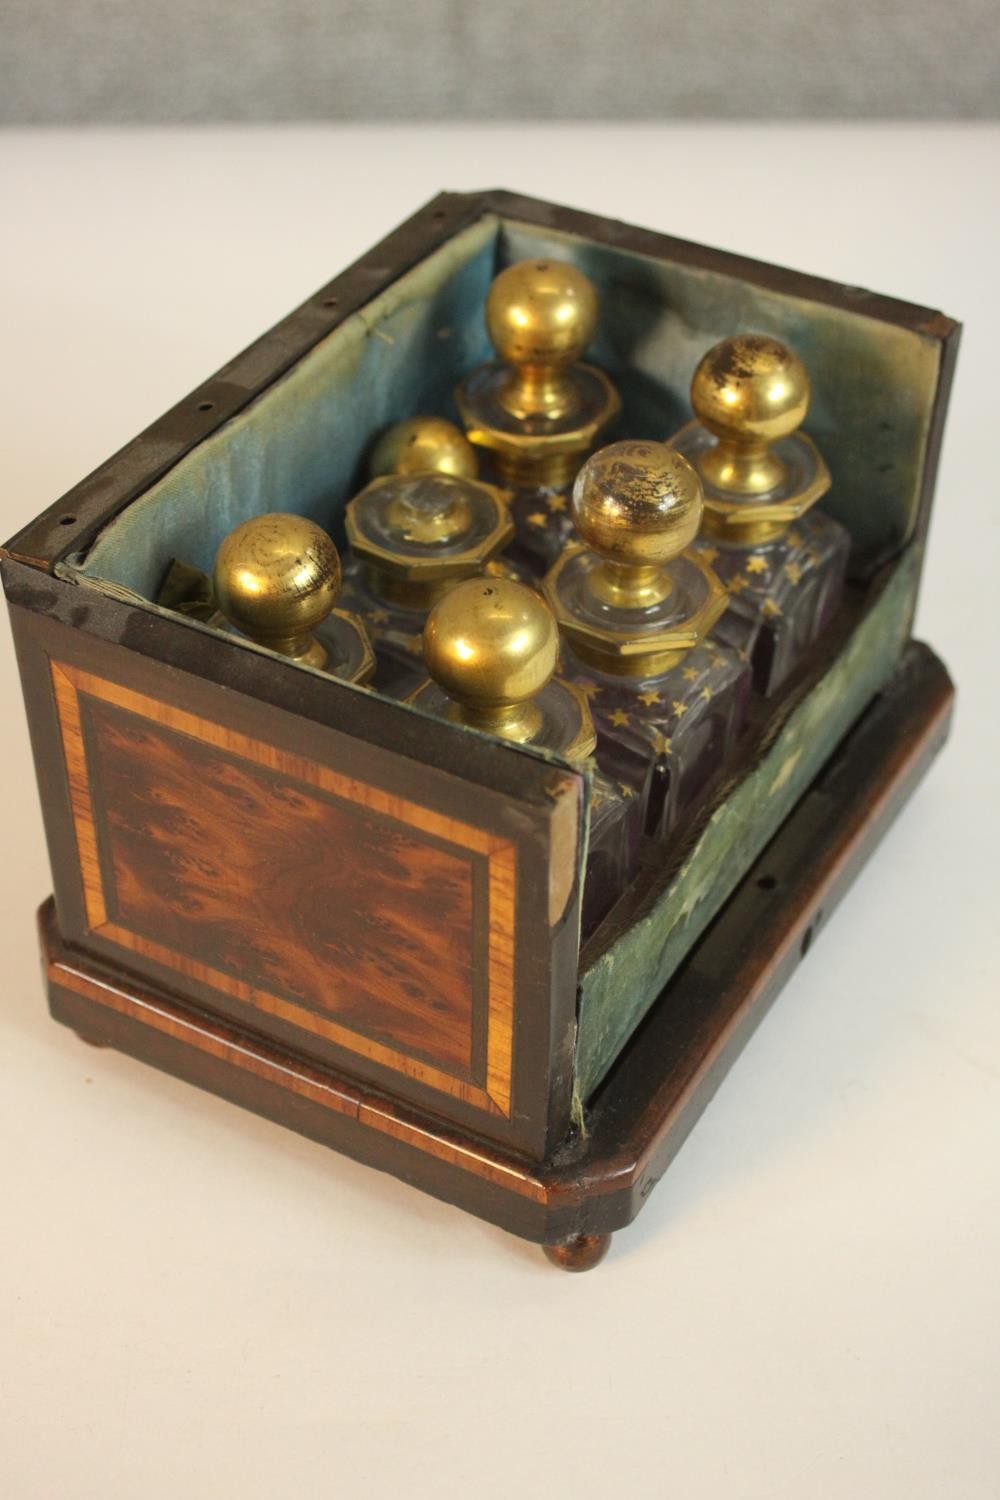 A 19th century six bottle perfume box, inlaid with burr wood panels, missing the front and lid, with - Image 8 of 9